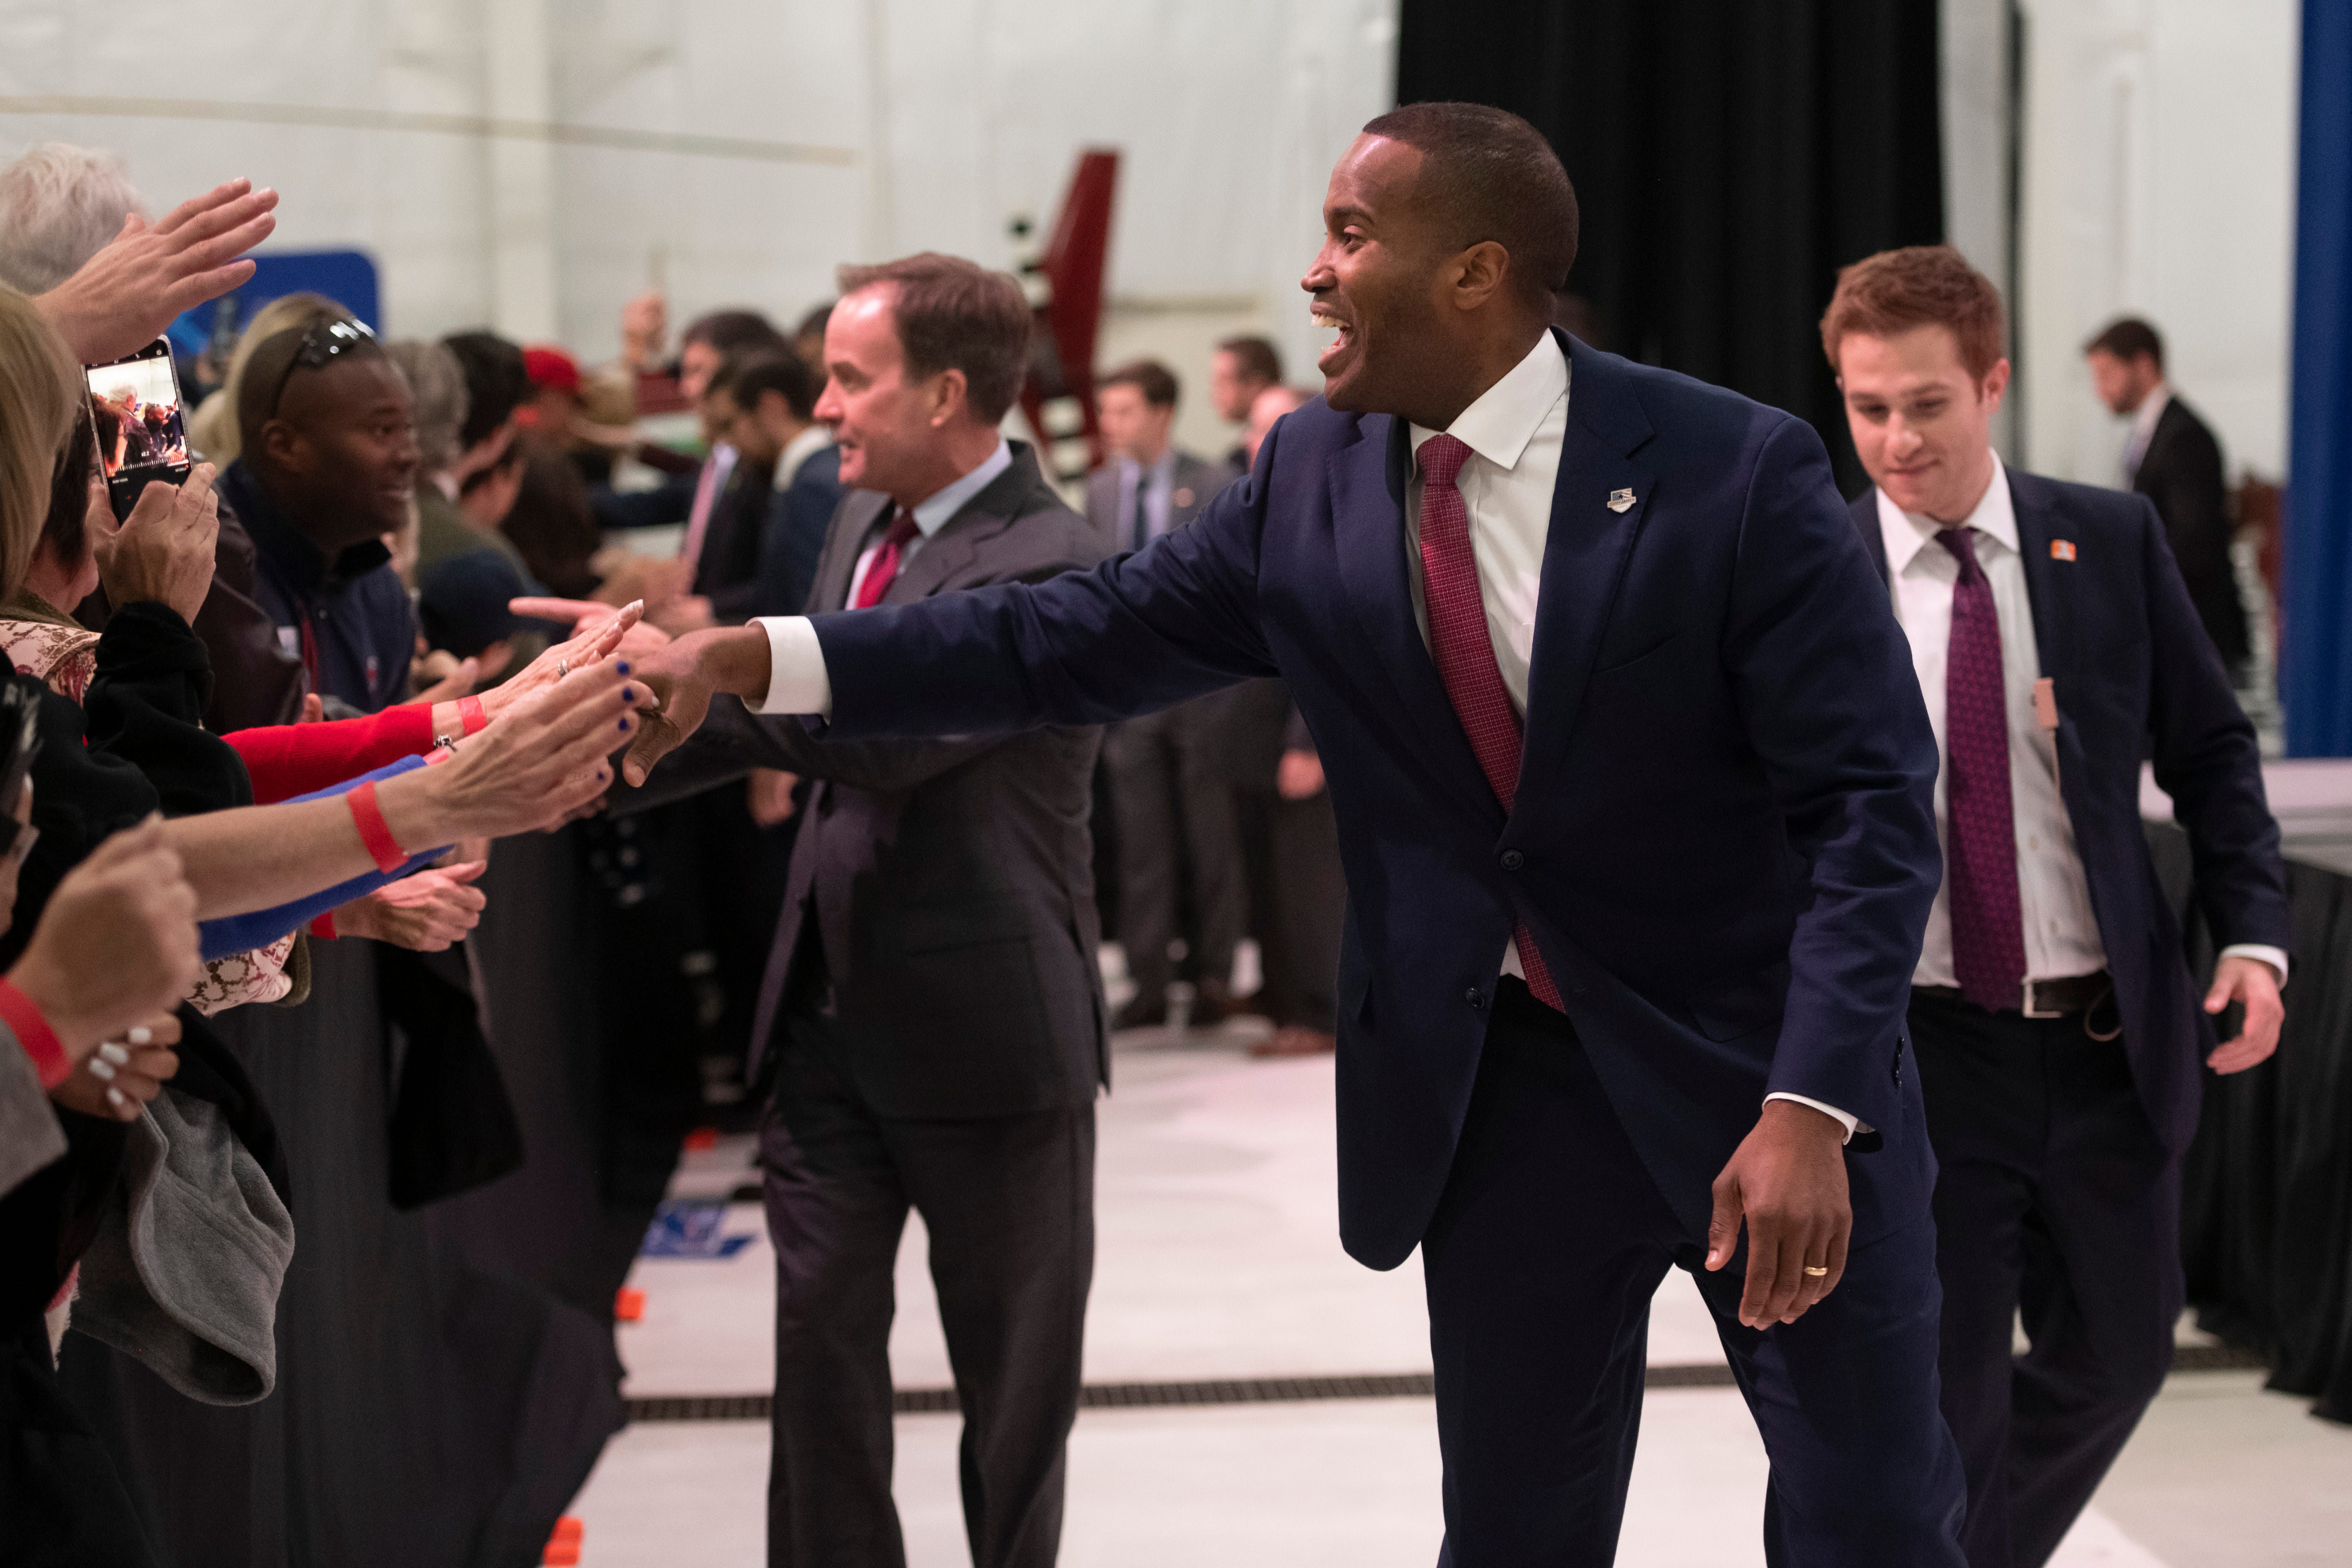 U.S. senate candidate John James shakes hands with supporters at the end of the rally.